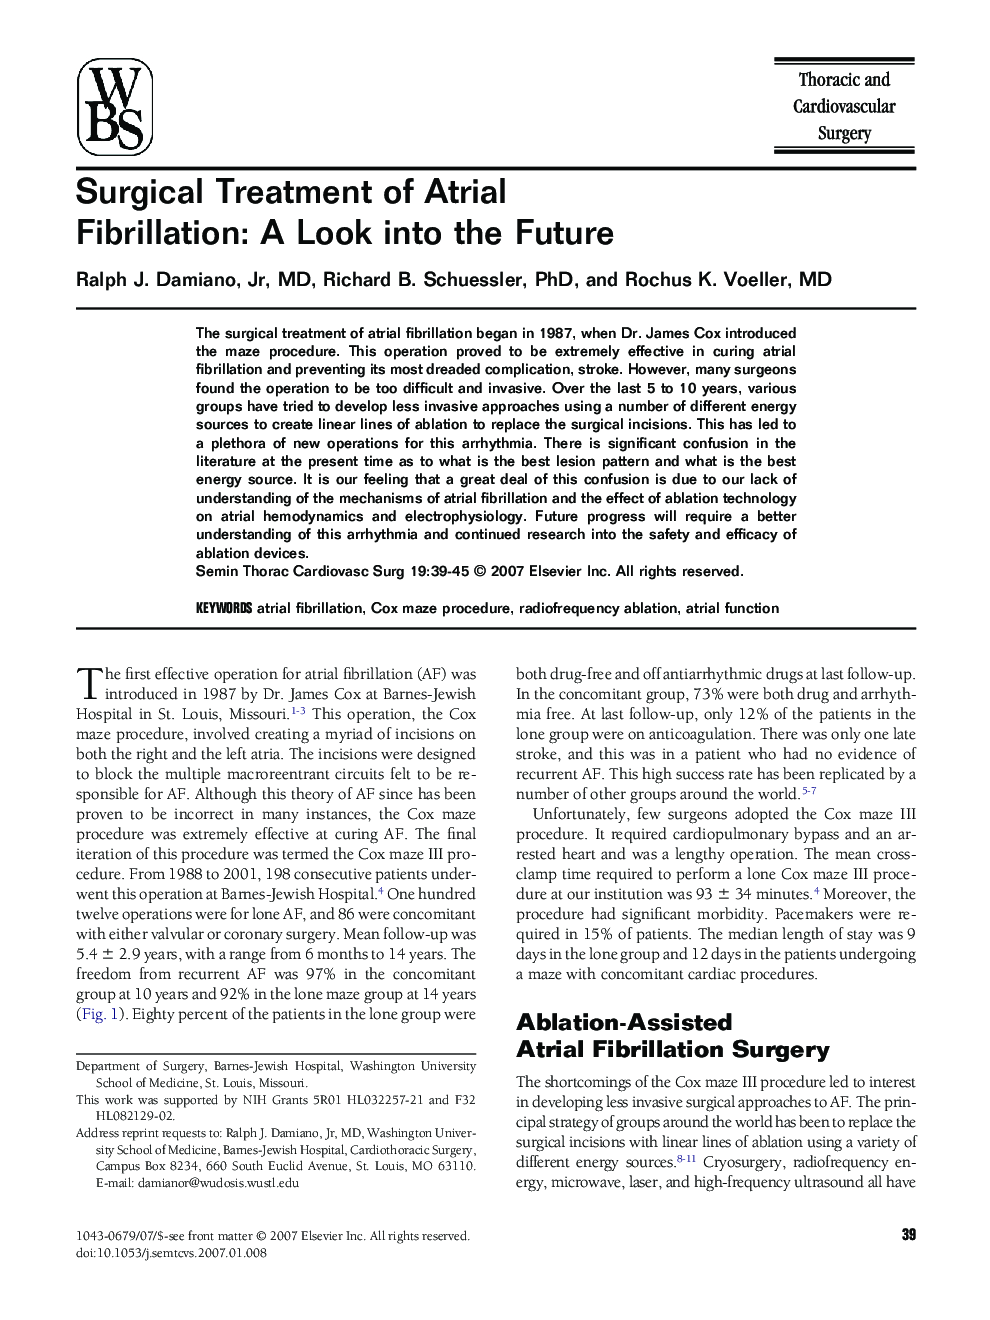 Surgical Treatment of Atrial Fibrillation: A Look into the Future